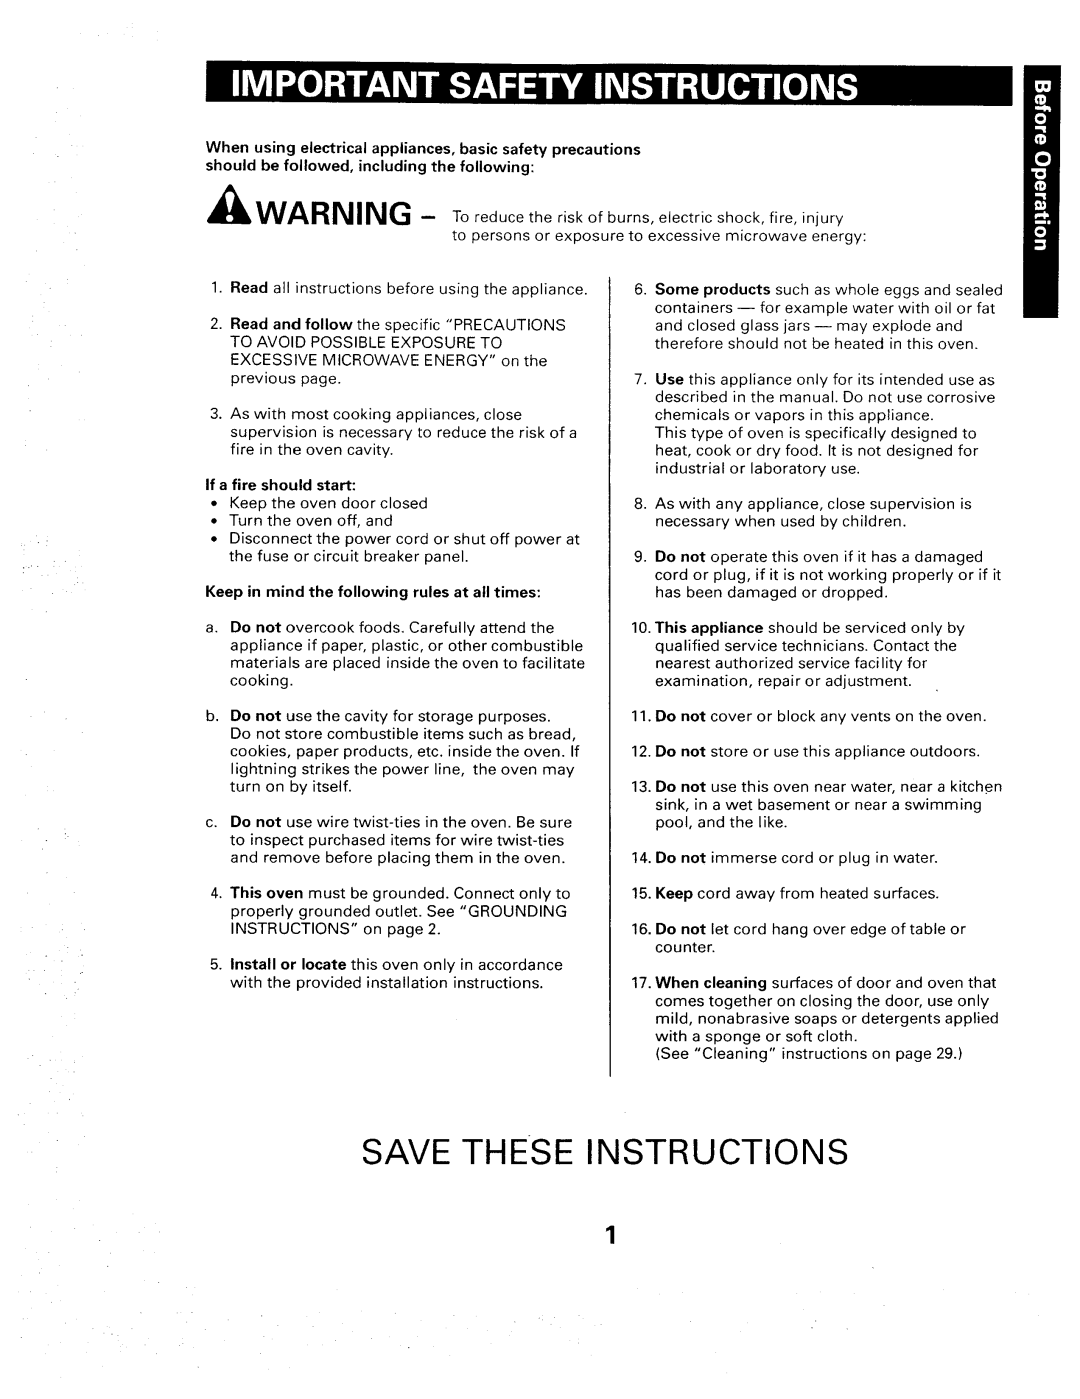 Sears 565. 66480 Save These Instructions, If a fire should start, Keep in mind the following rules at all times 